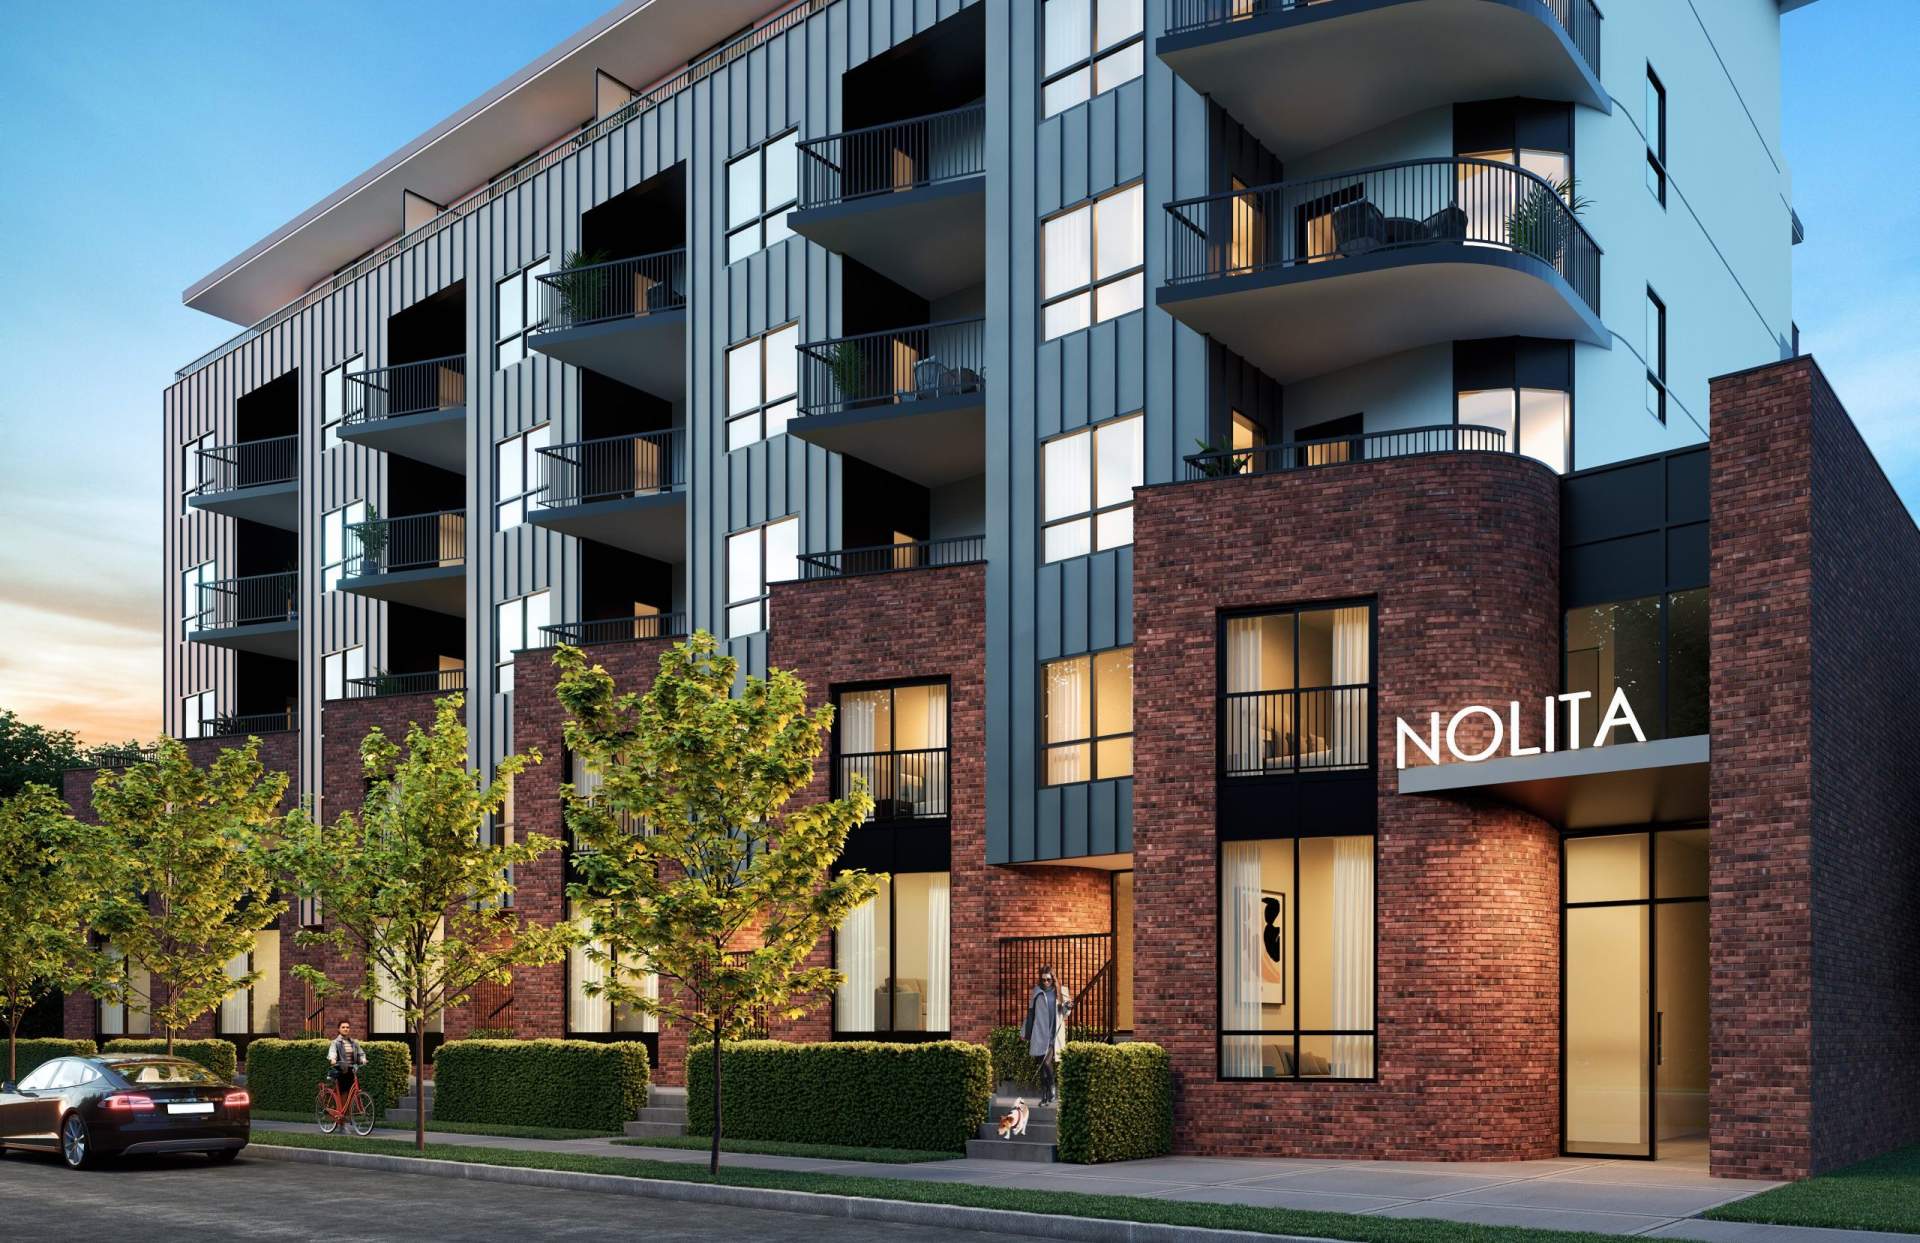 Nolita by Fifth Avenue Properties – Plans, Prices, Availability